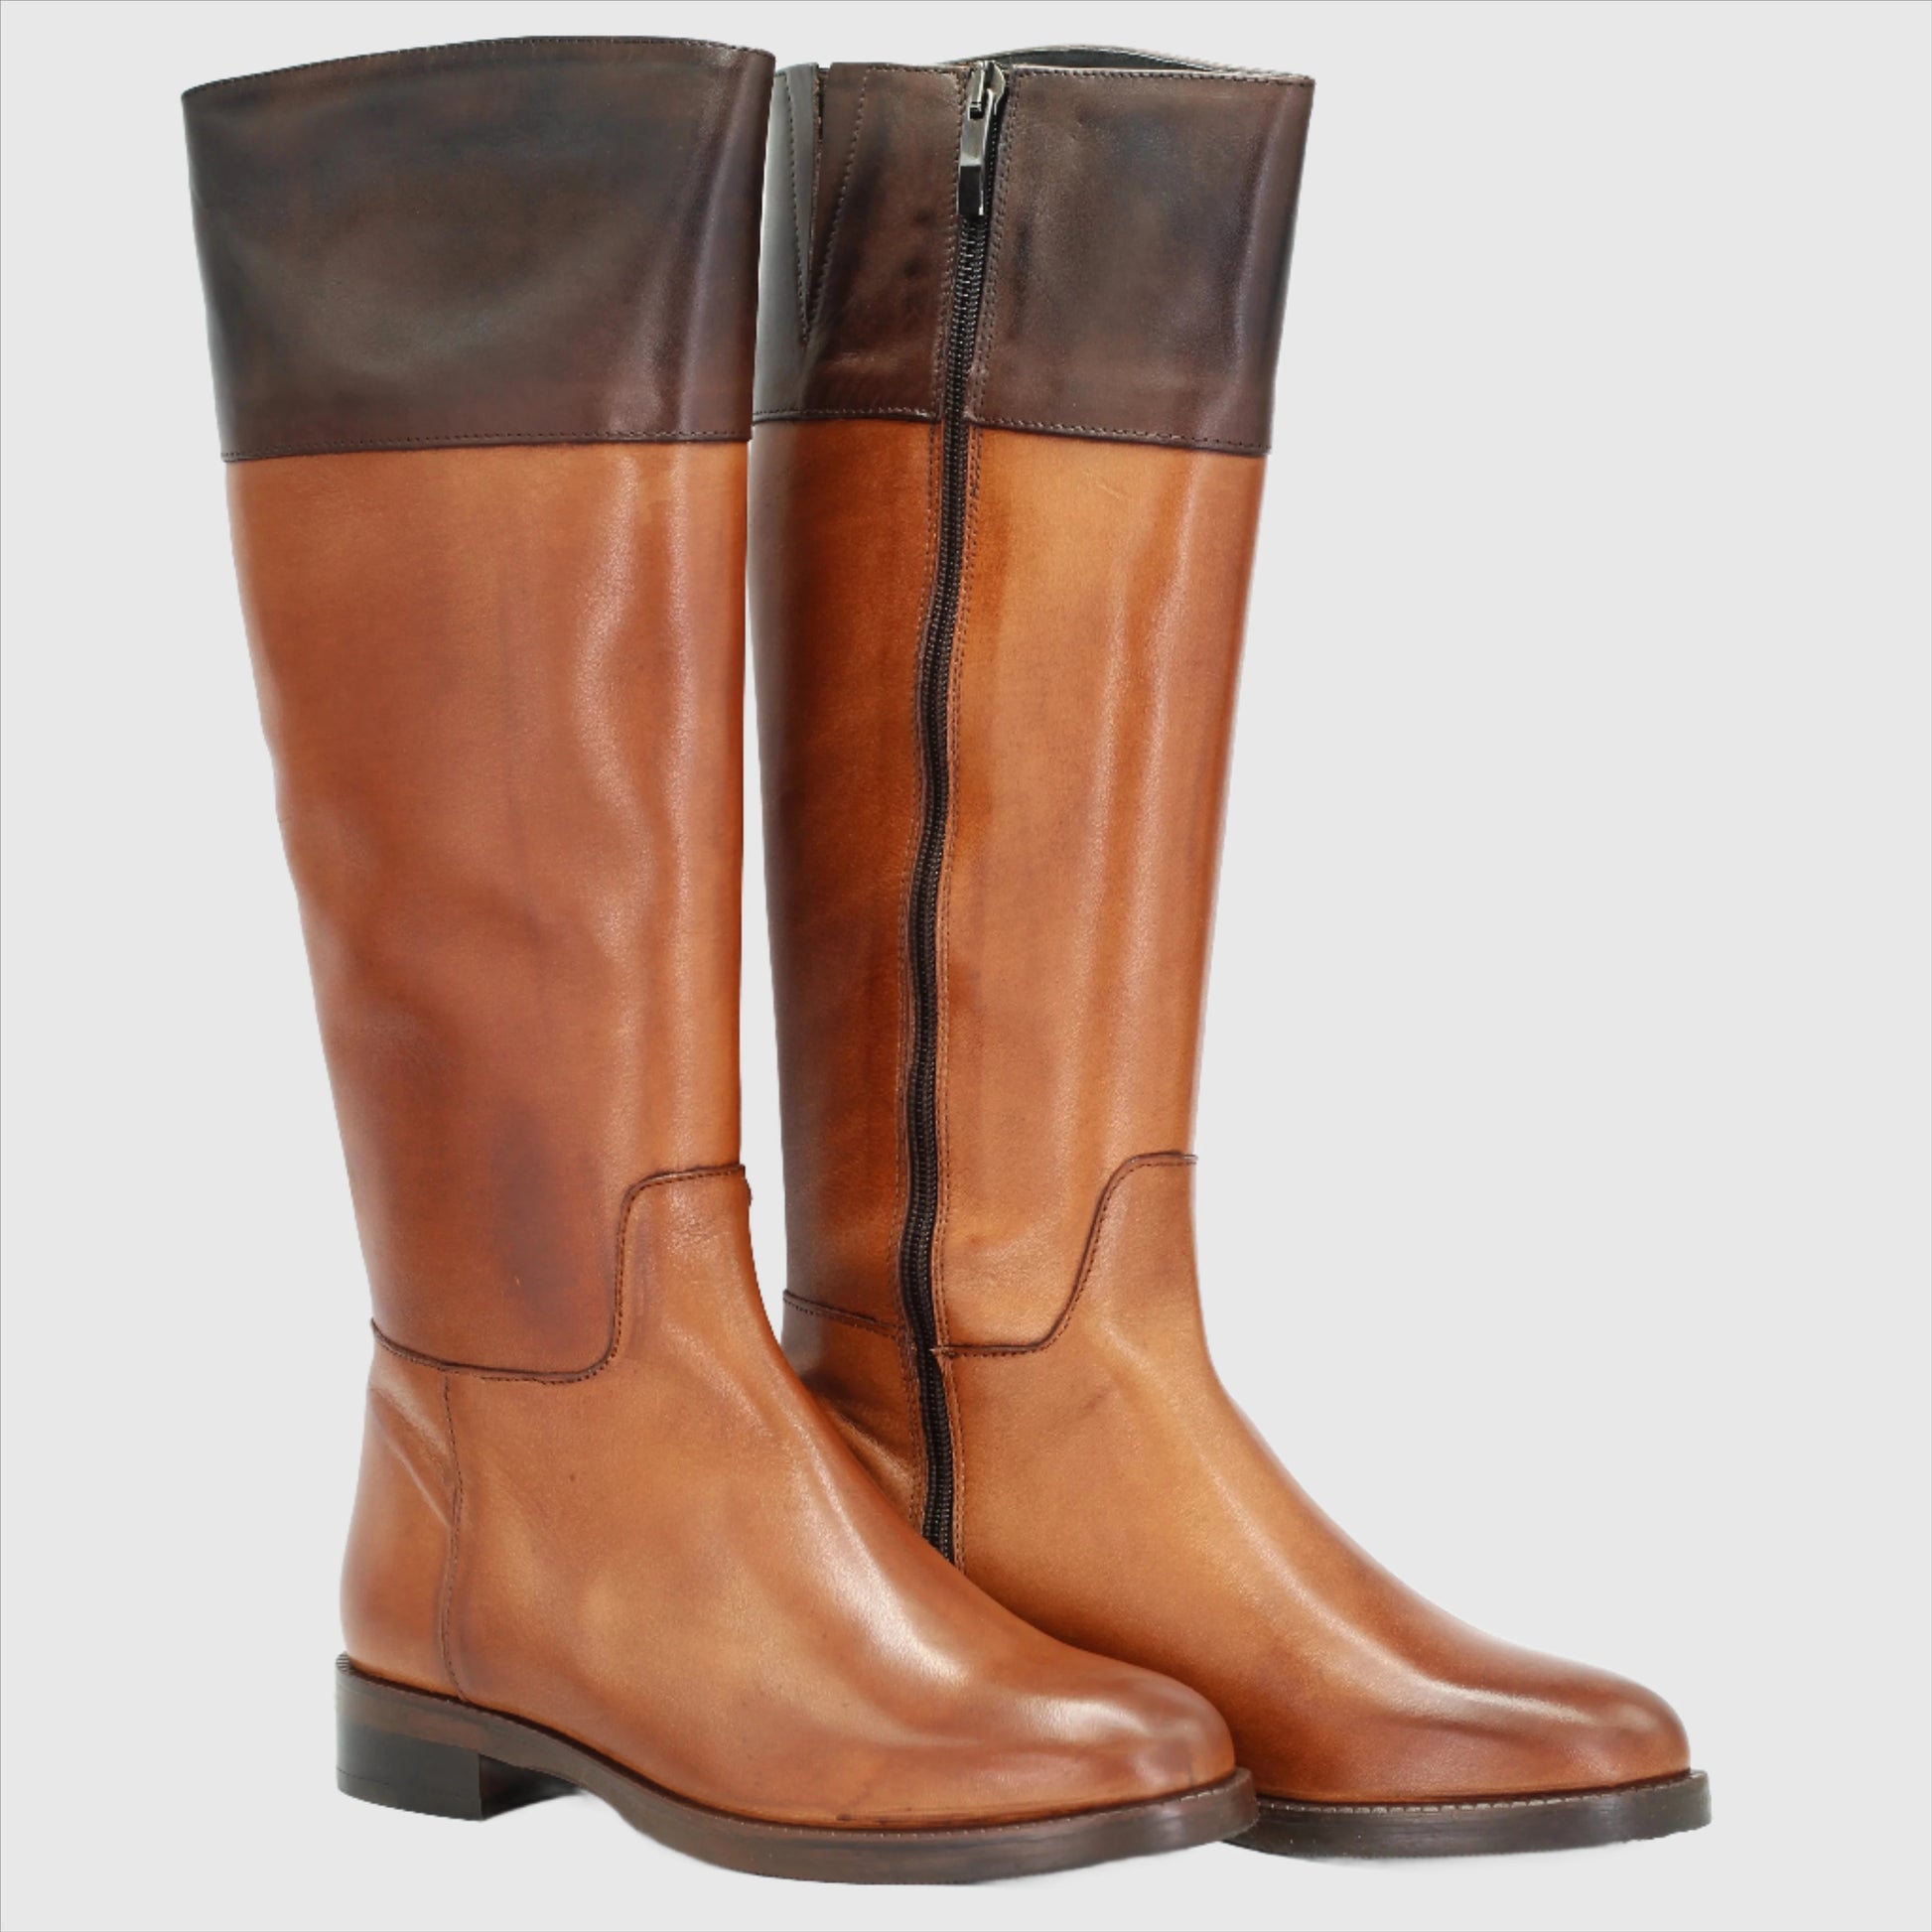 Shop Handmade Italian Leather equestrian boot in cuoio testa di moro (GC2060) or browse our range of hand-made Italian shoes in leather or suede in-store at Aliverti Cape Town, or shop online. We deliver in South Africa & offer multiple payment plans as well as accept multiple safe & secure payment methods.